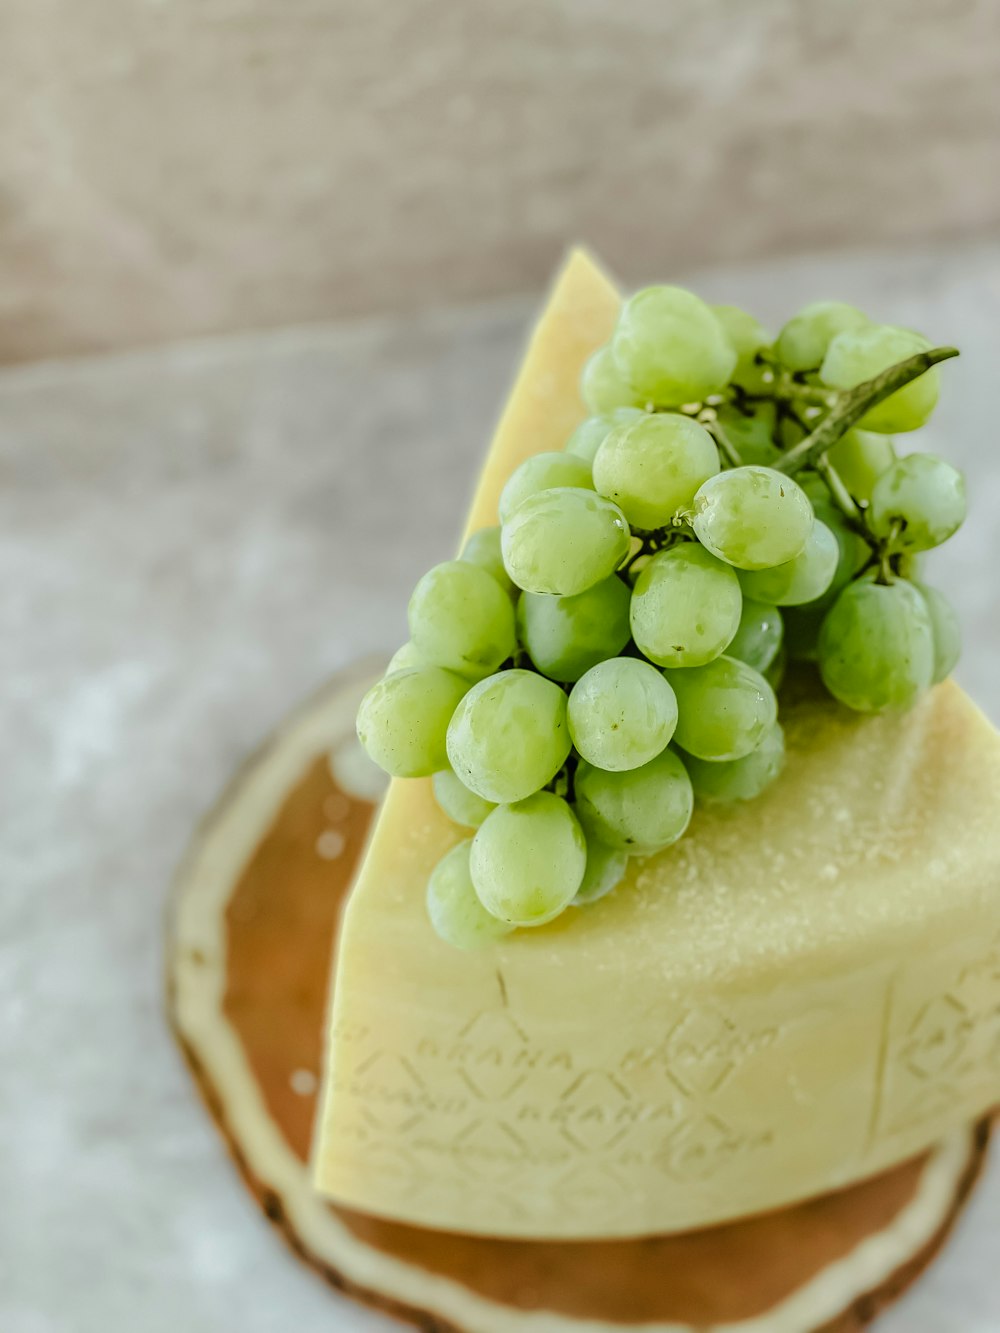 a piece of cheese with grapes on top of it